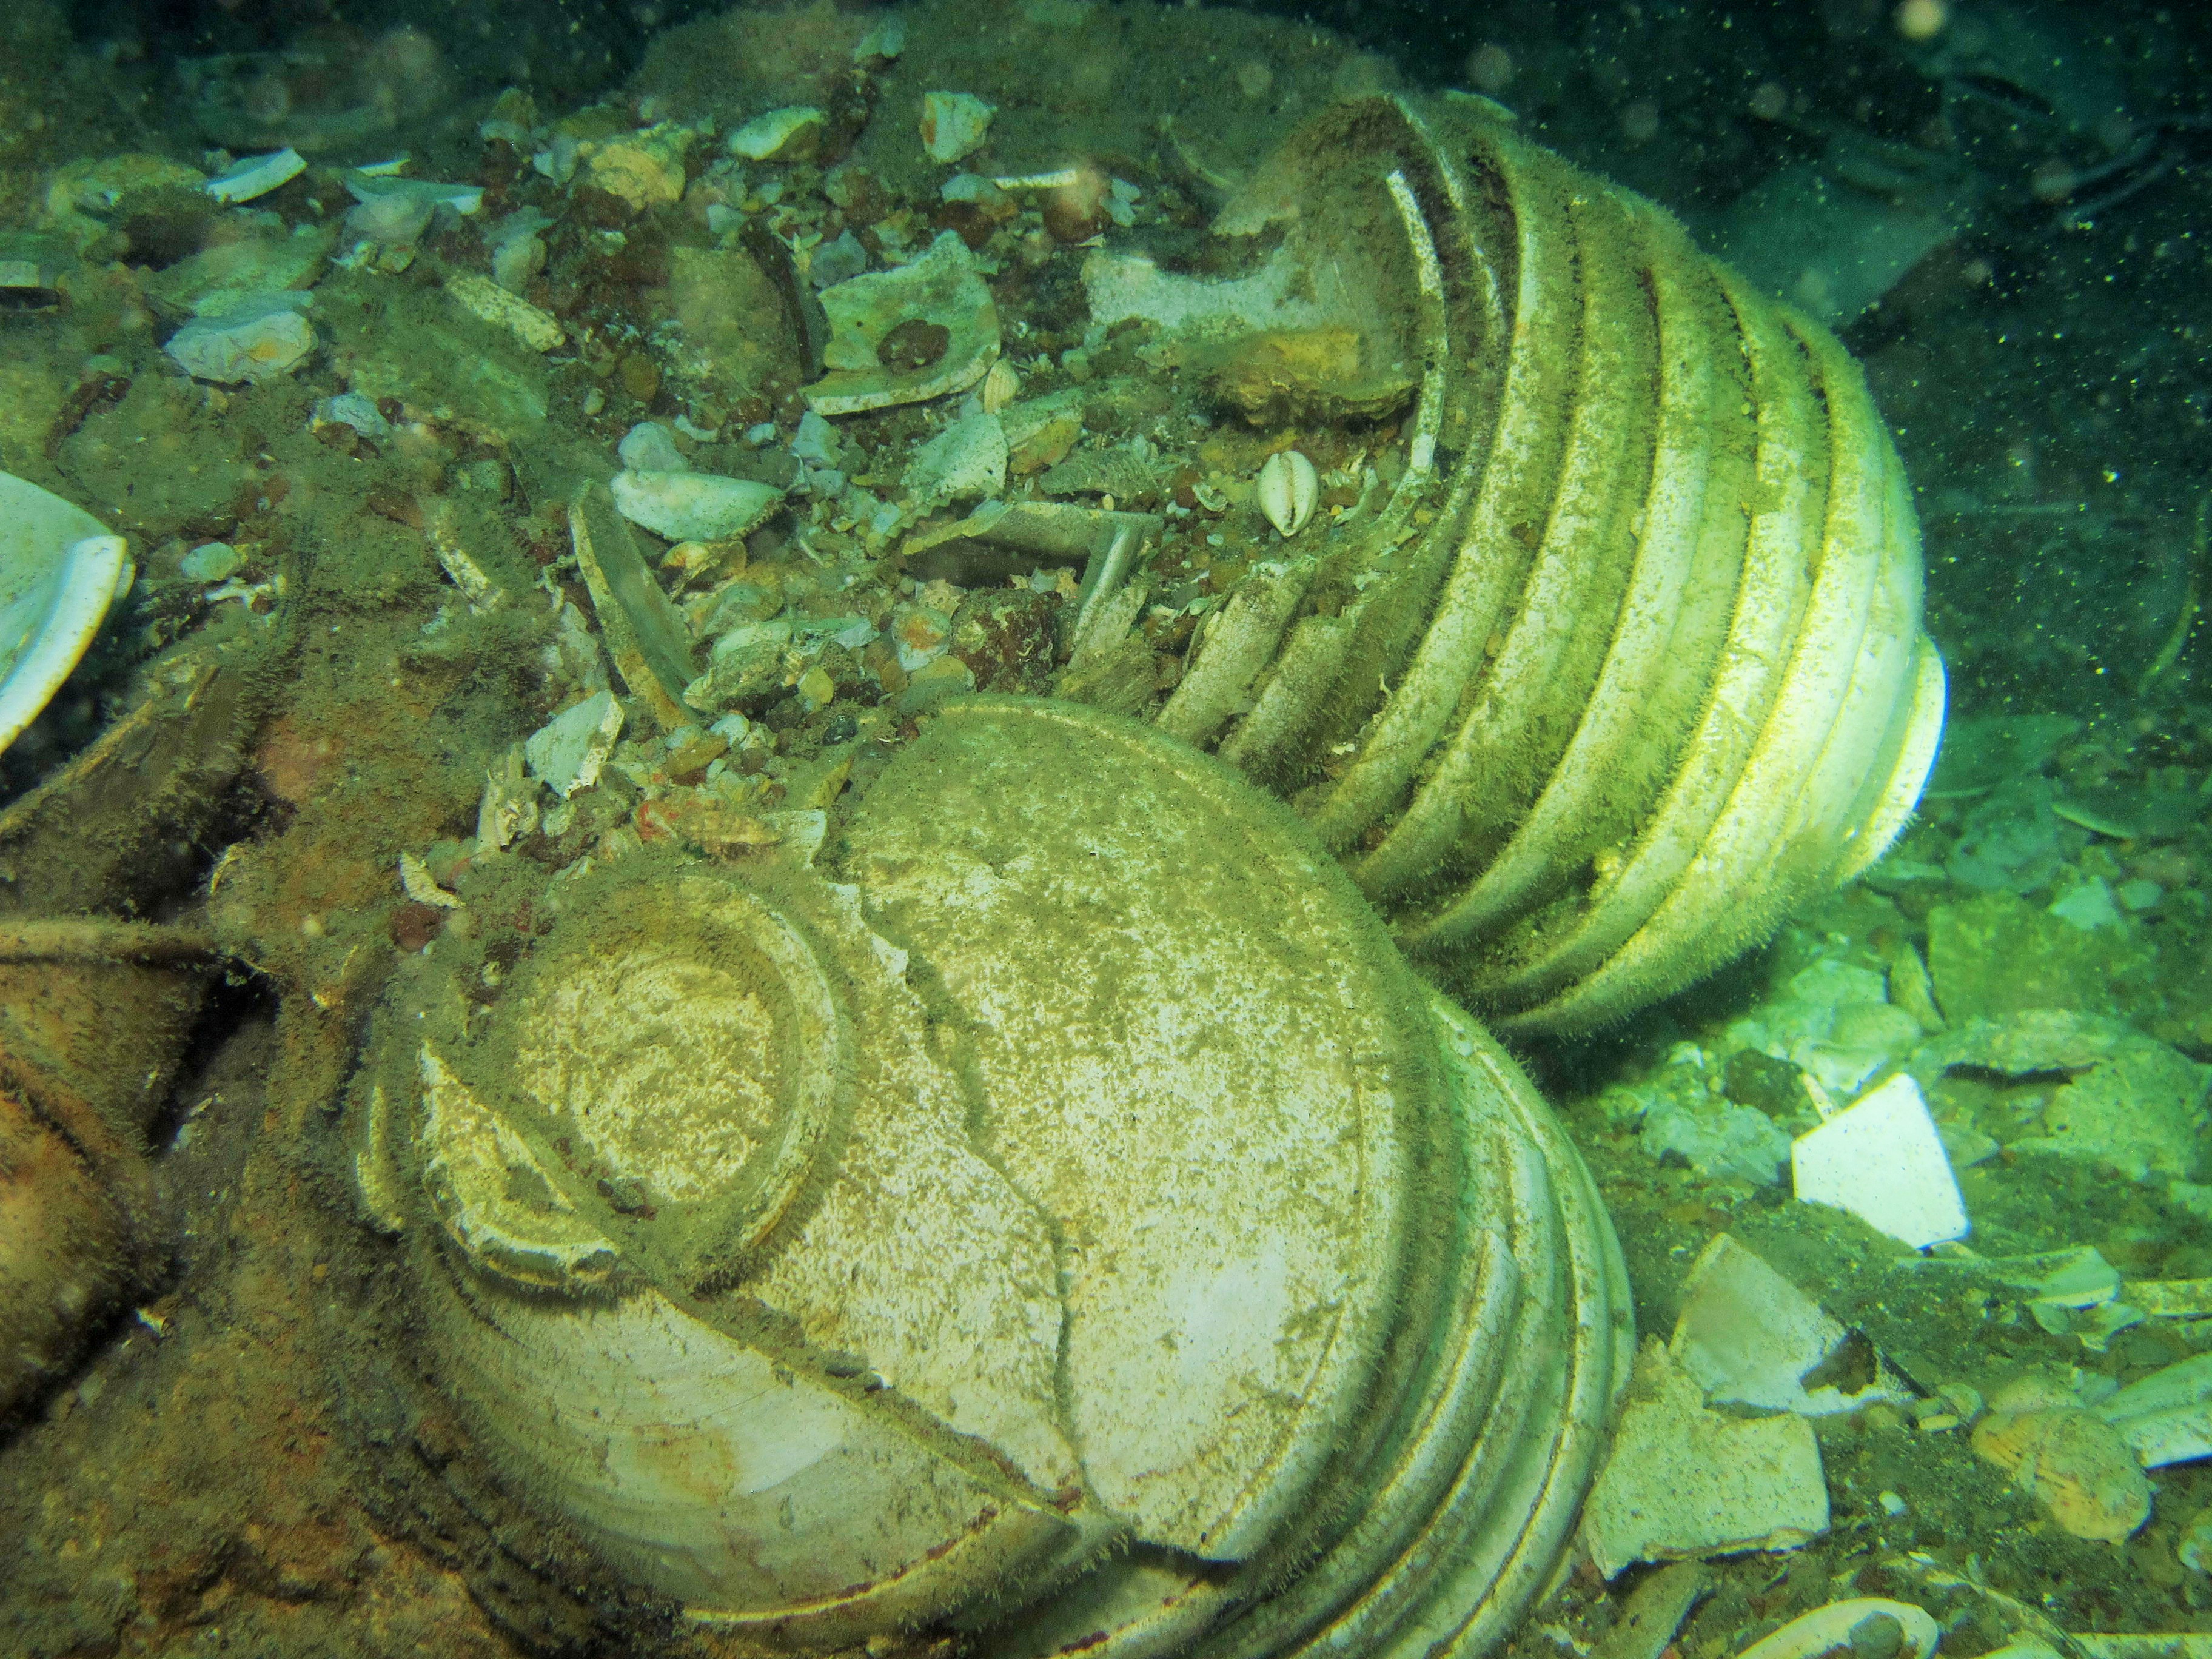 Stacks of folded-rim bowls stuck to an iron concretion.